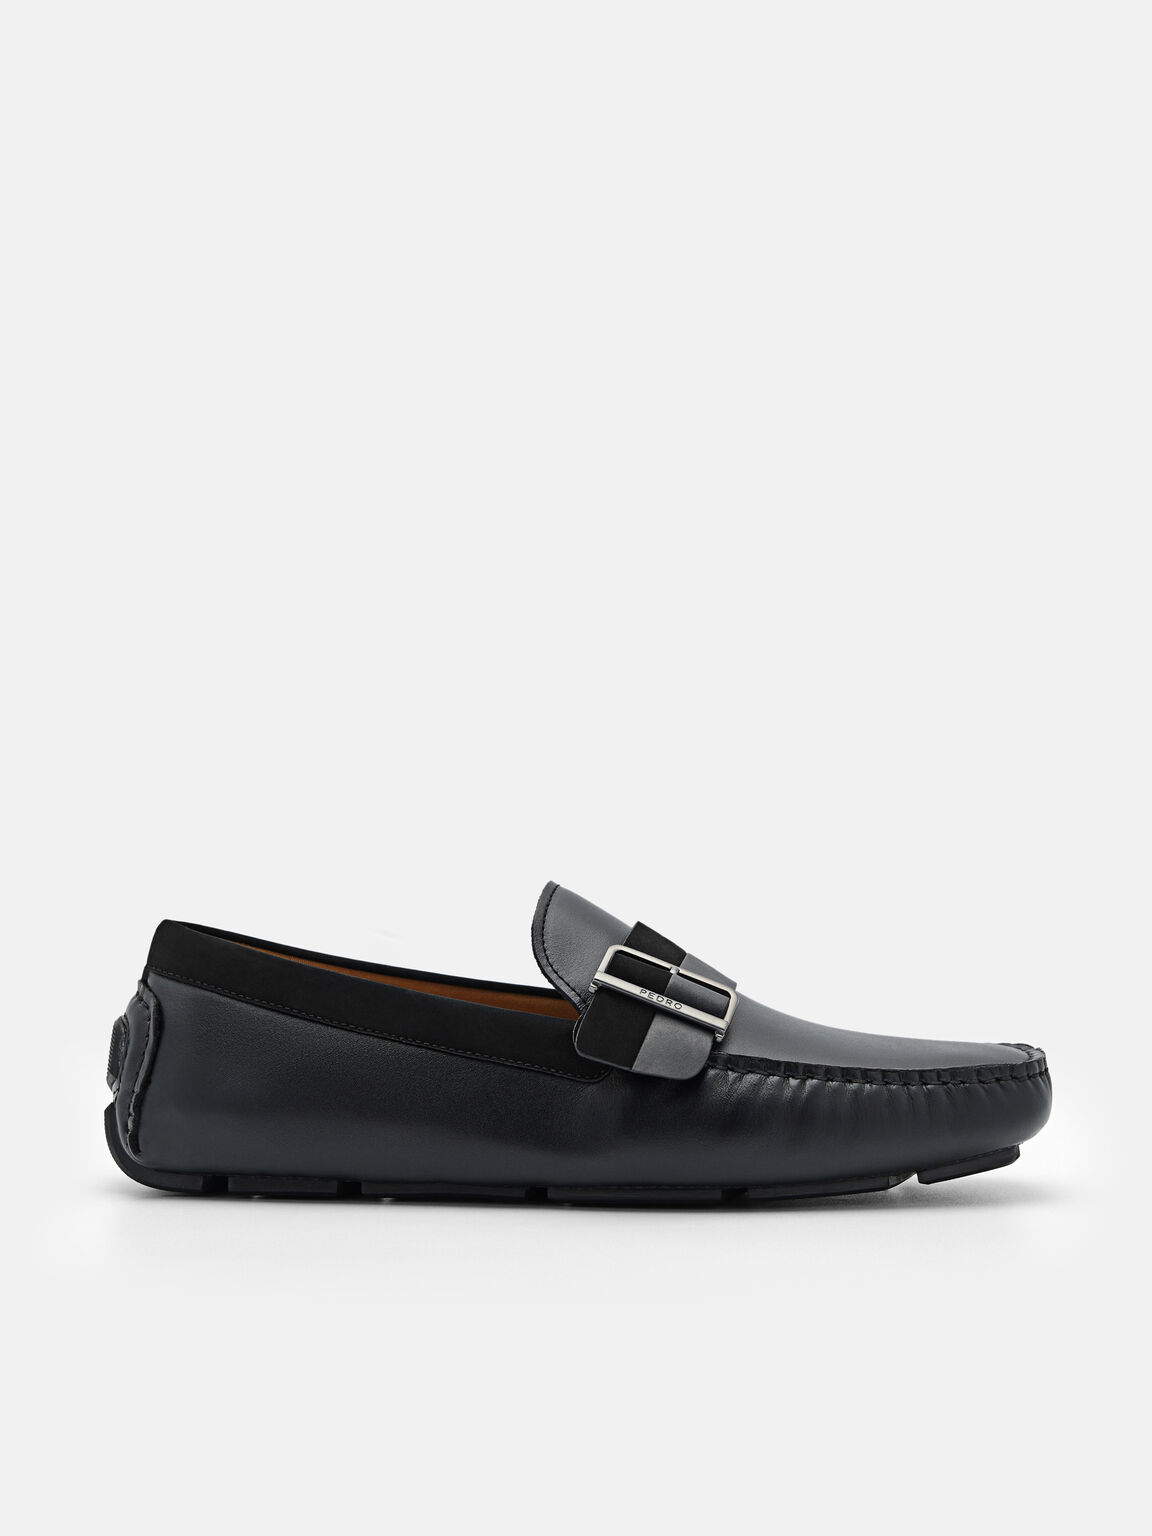 Ripley Leather Moccasins, Black